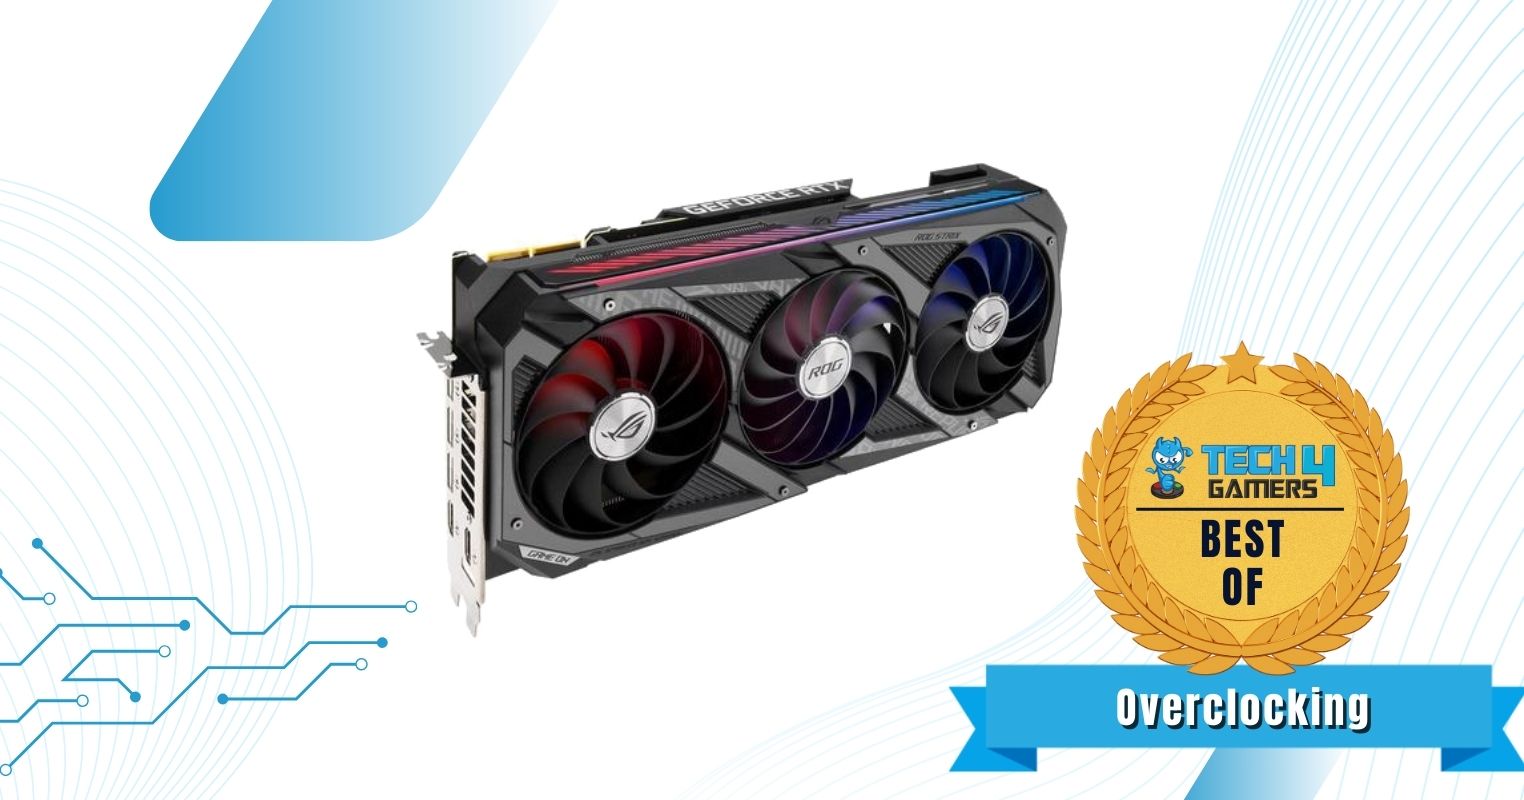 Best Overclocking RTX 3090 Graphics Card - ASUS ROG Strix NVIDIA GeForce RTX 3090 Gaming